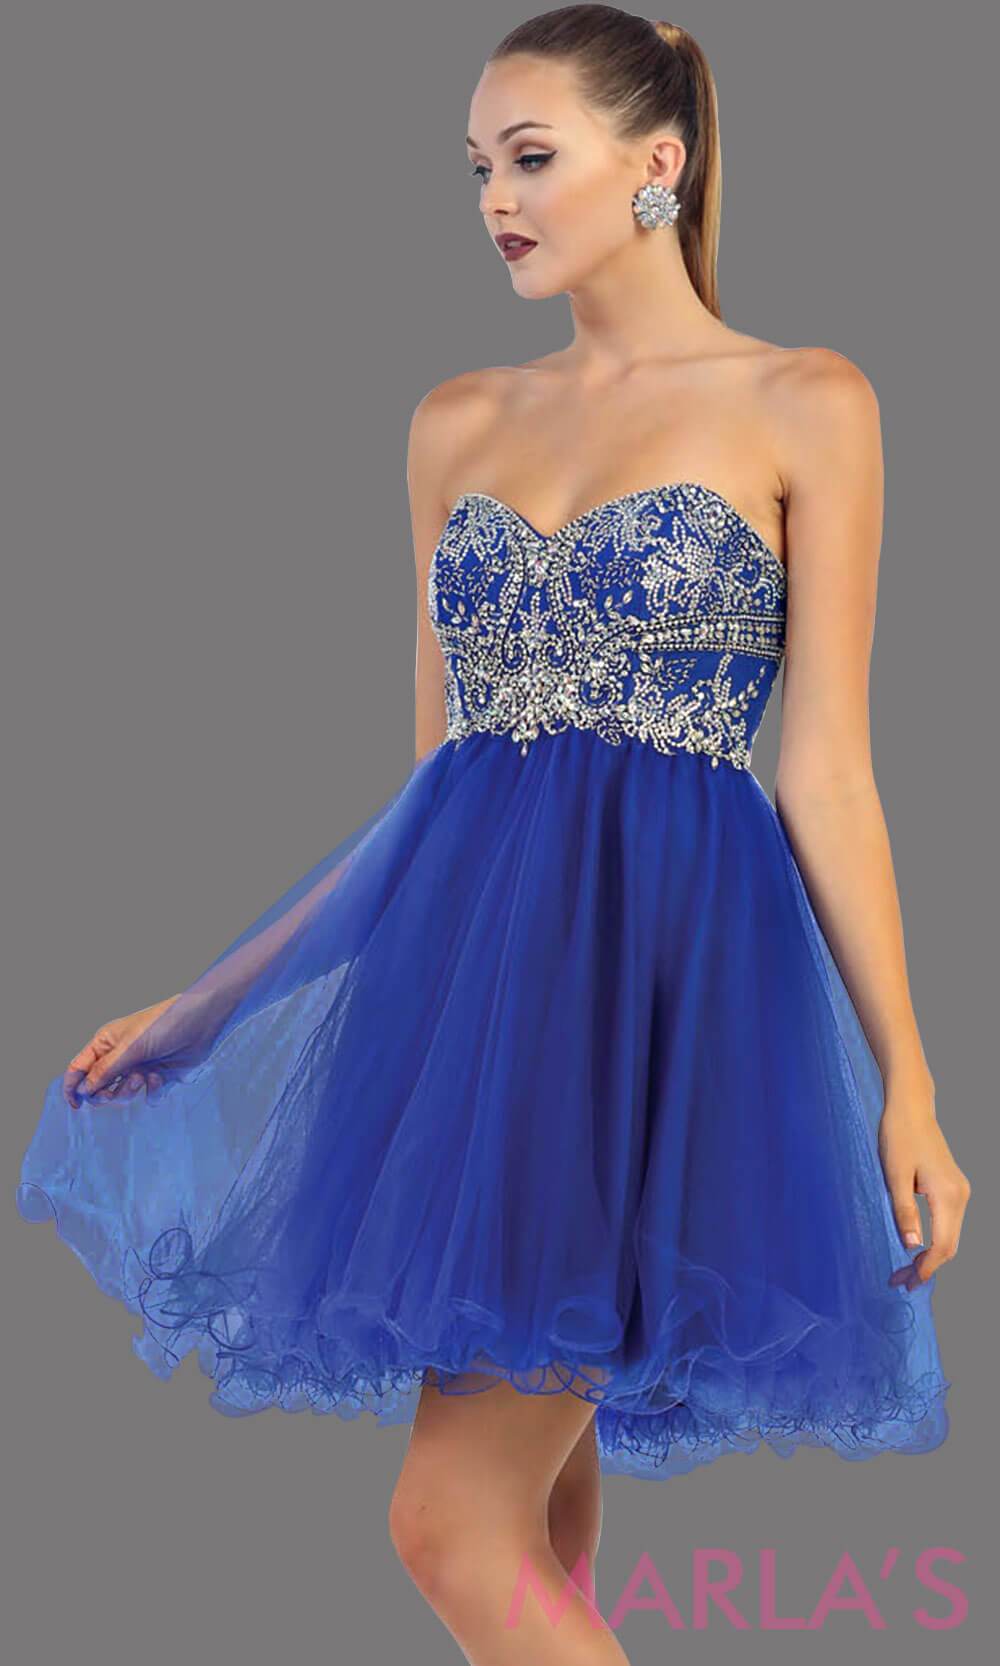 Short strapless puffy royal blue dress. This short blue grade 8 graduation dress has sequin bodice and corset back. This is perfect for homecoming, semi formal, bridal shower. Available in plus sizes